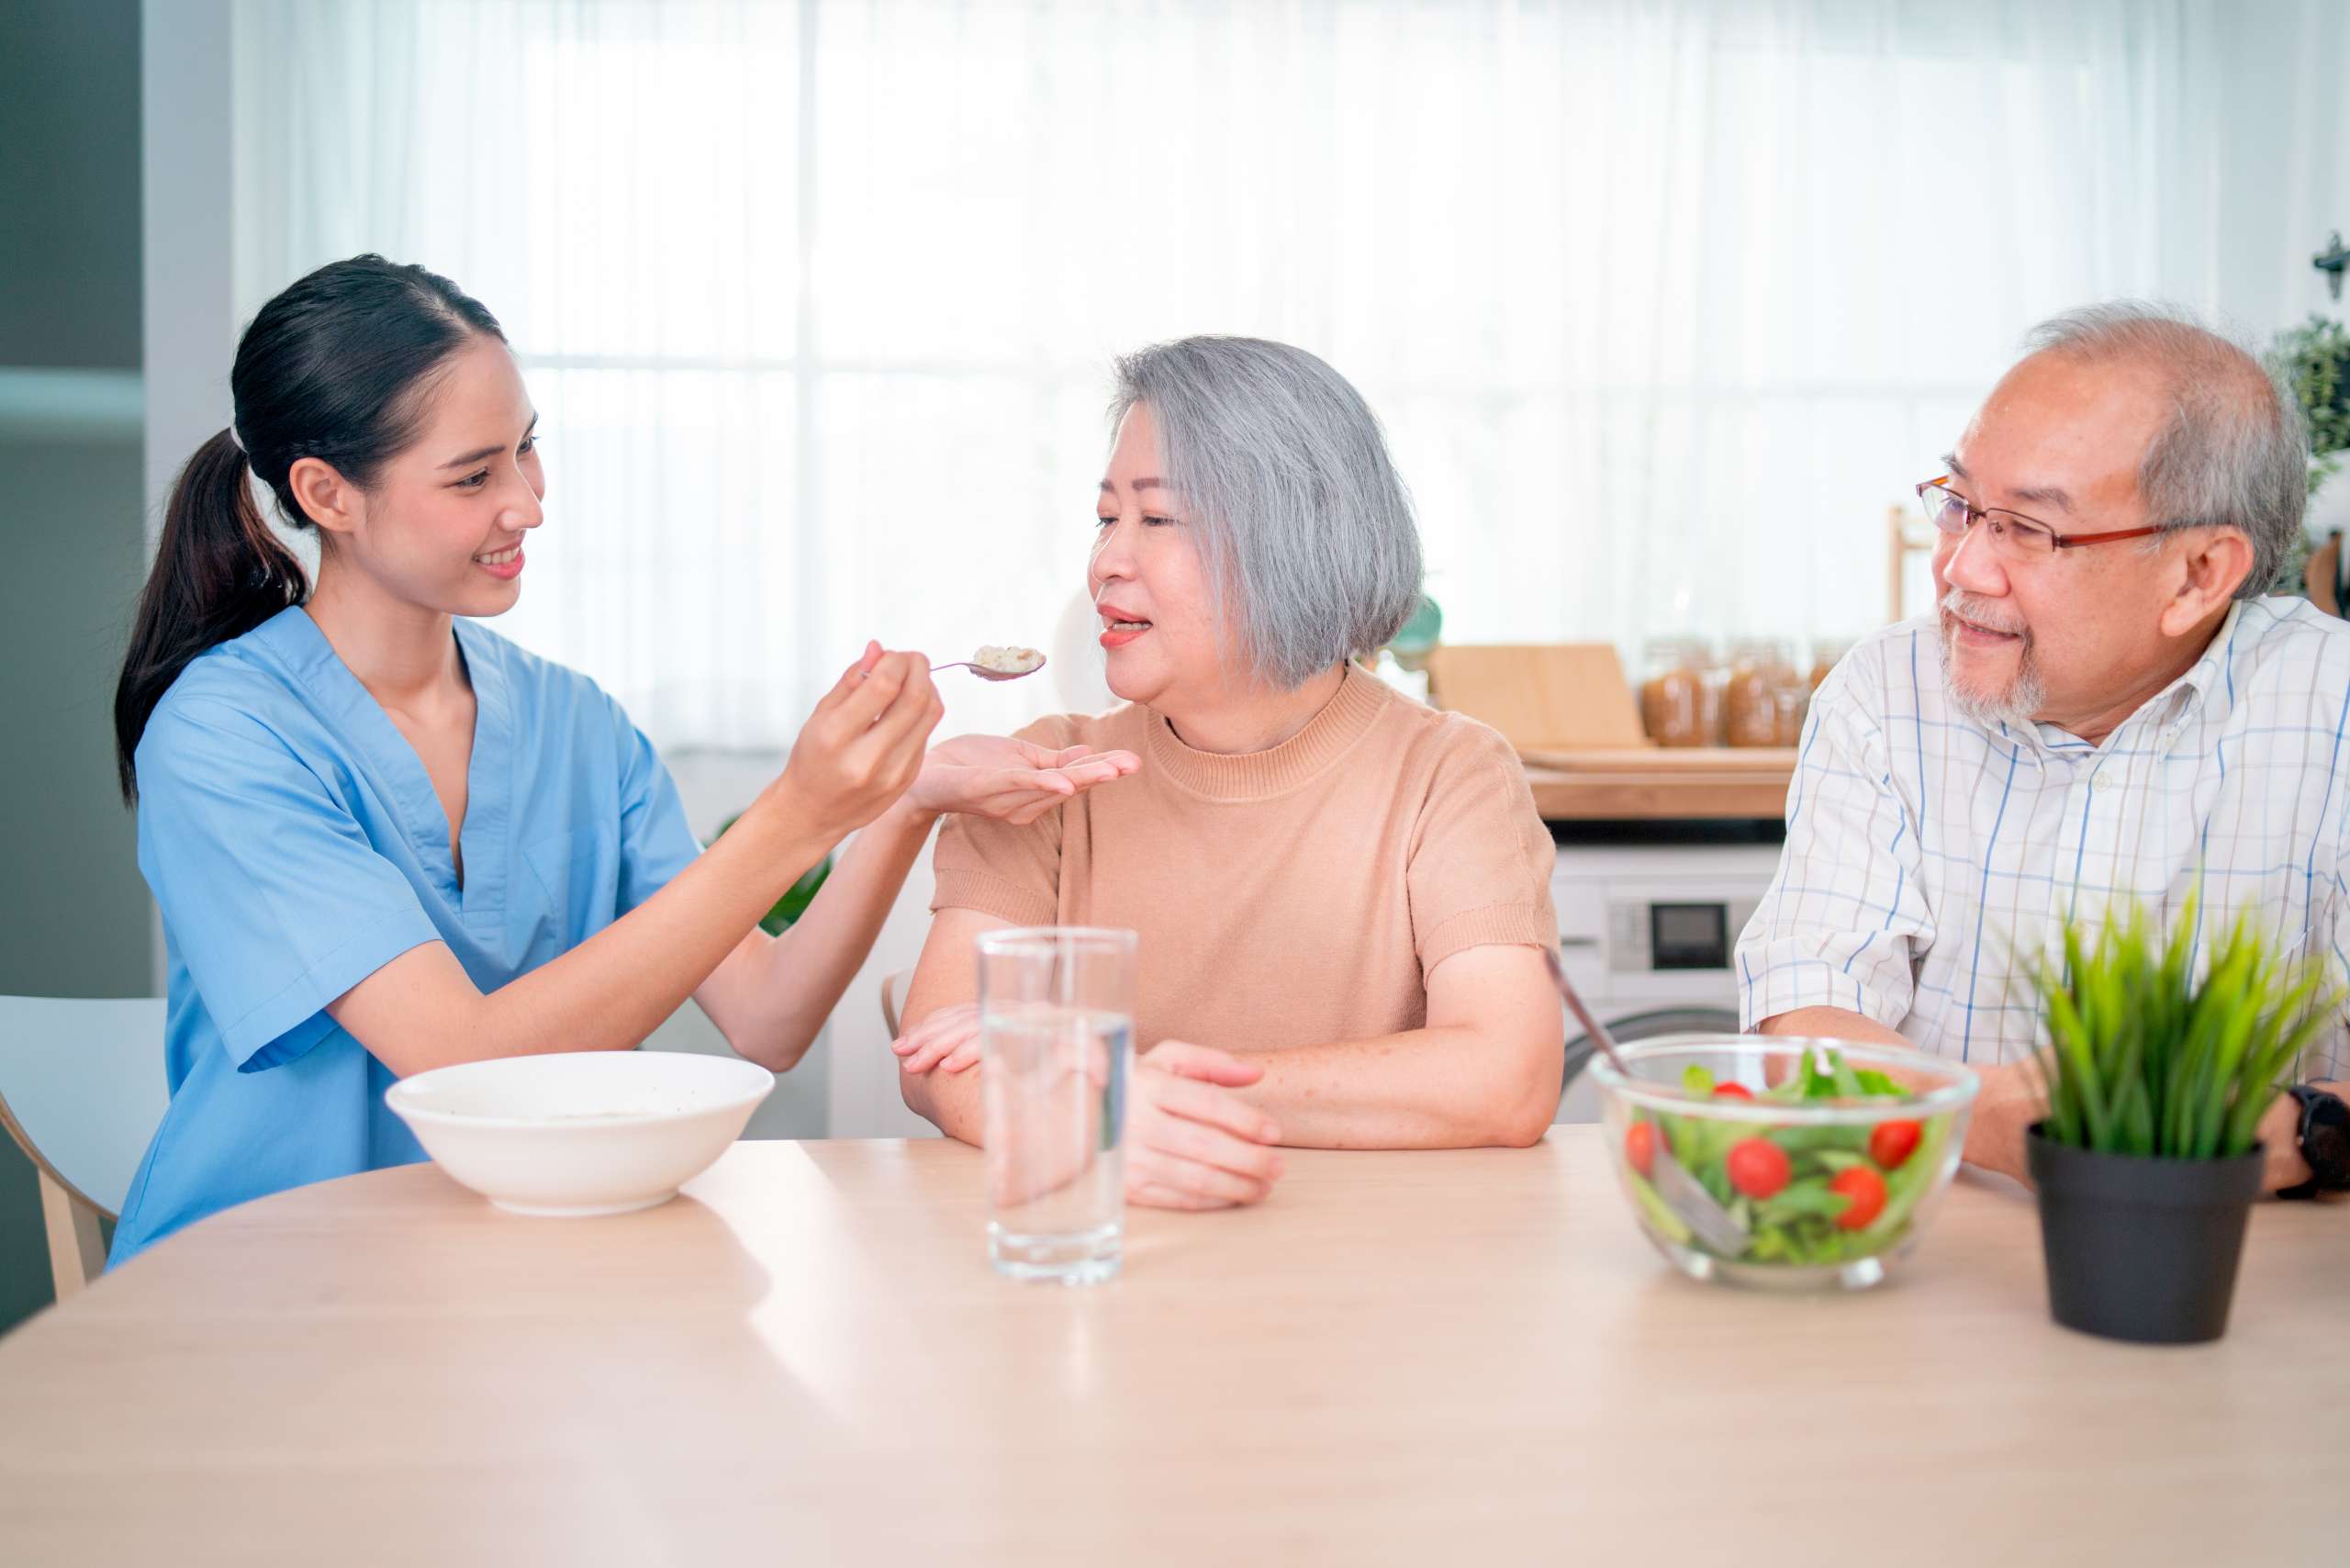 Homecare staff helps to serve a spoon of mush rice to senior woman.